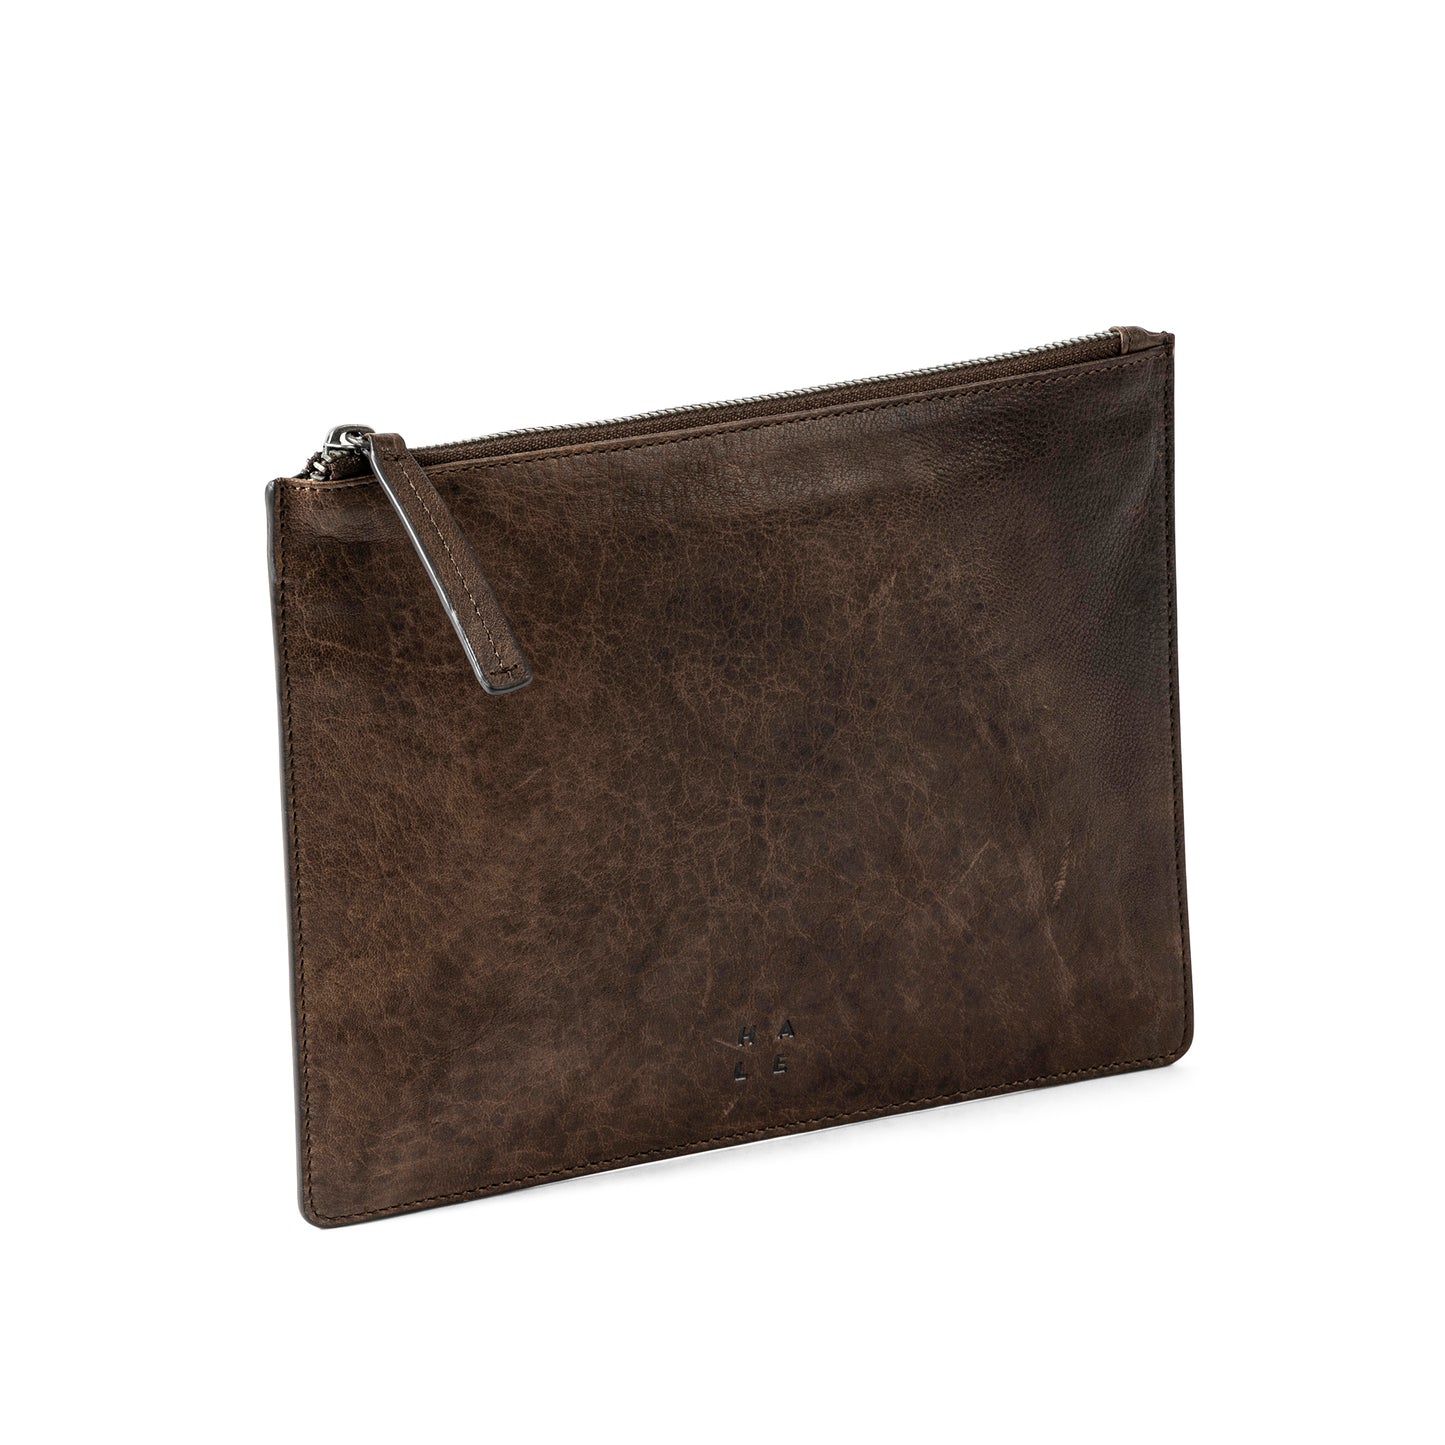 SIK Small Pouch Darkbrown